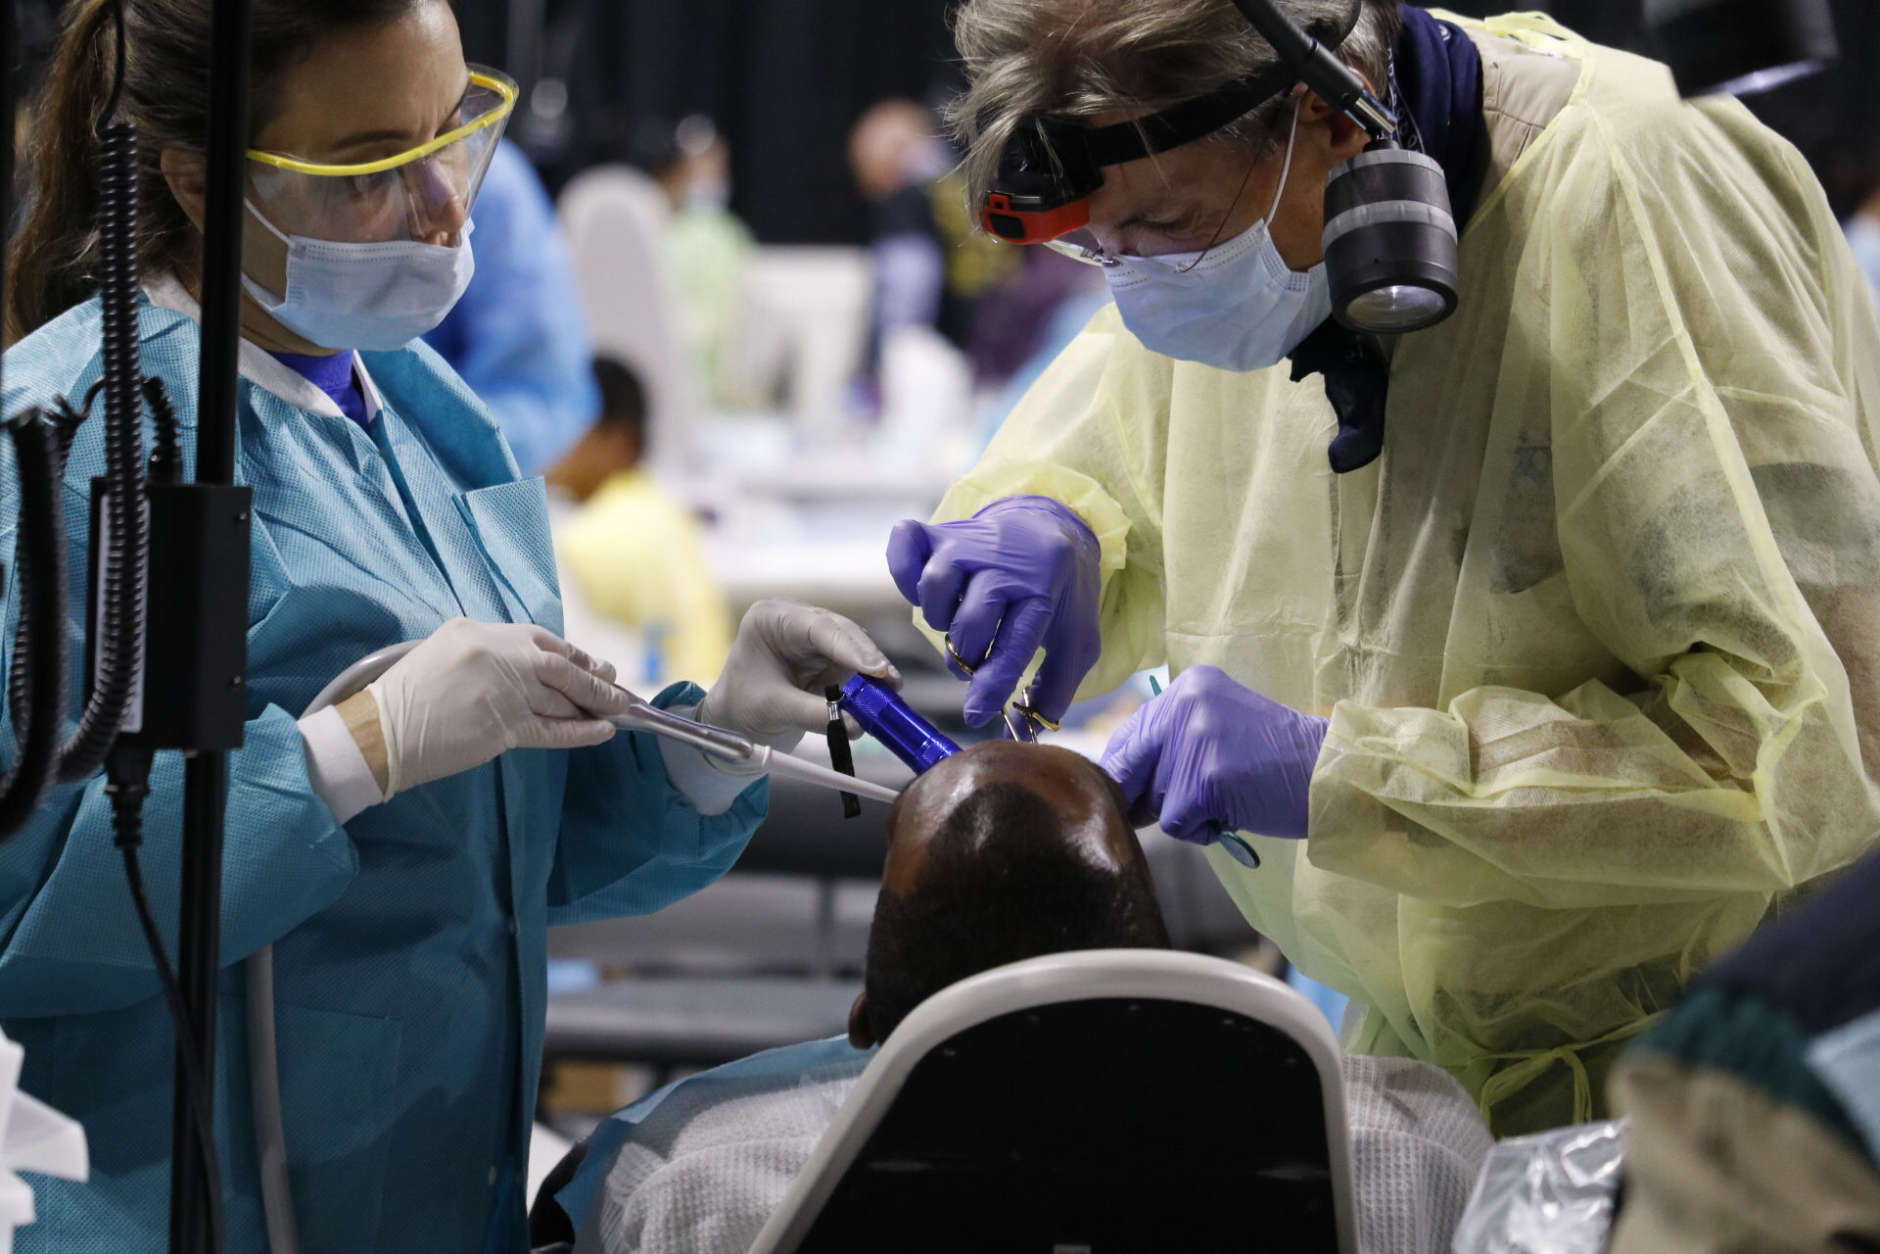 The "Mission of Mercy," a cooperative effort by the University of Maryland, Catholic Charities and the Maryland State Dental Association lined up hundreds of volunteers. They would see nearly a thousand patients before the end of the day. (WTOP/Kate Ryan)